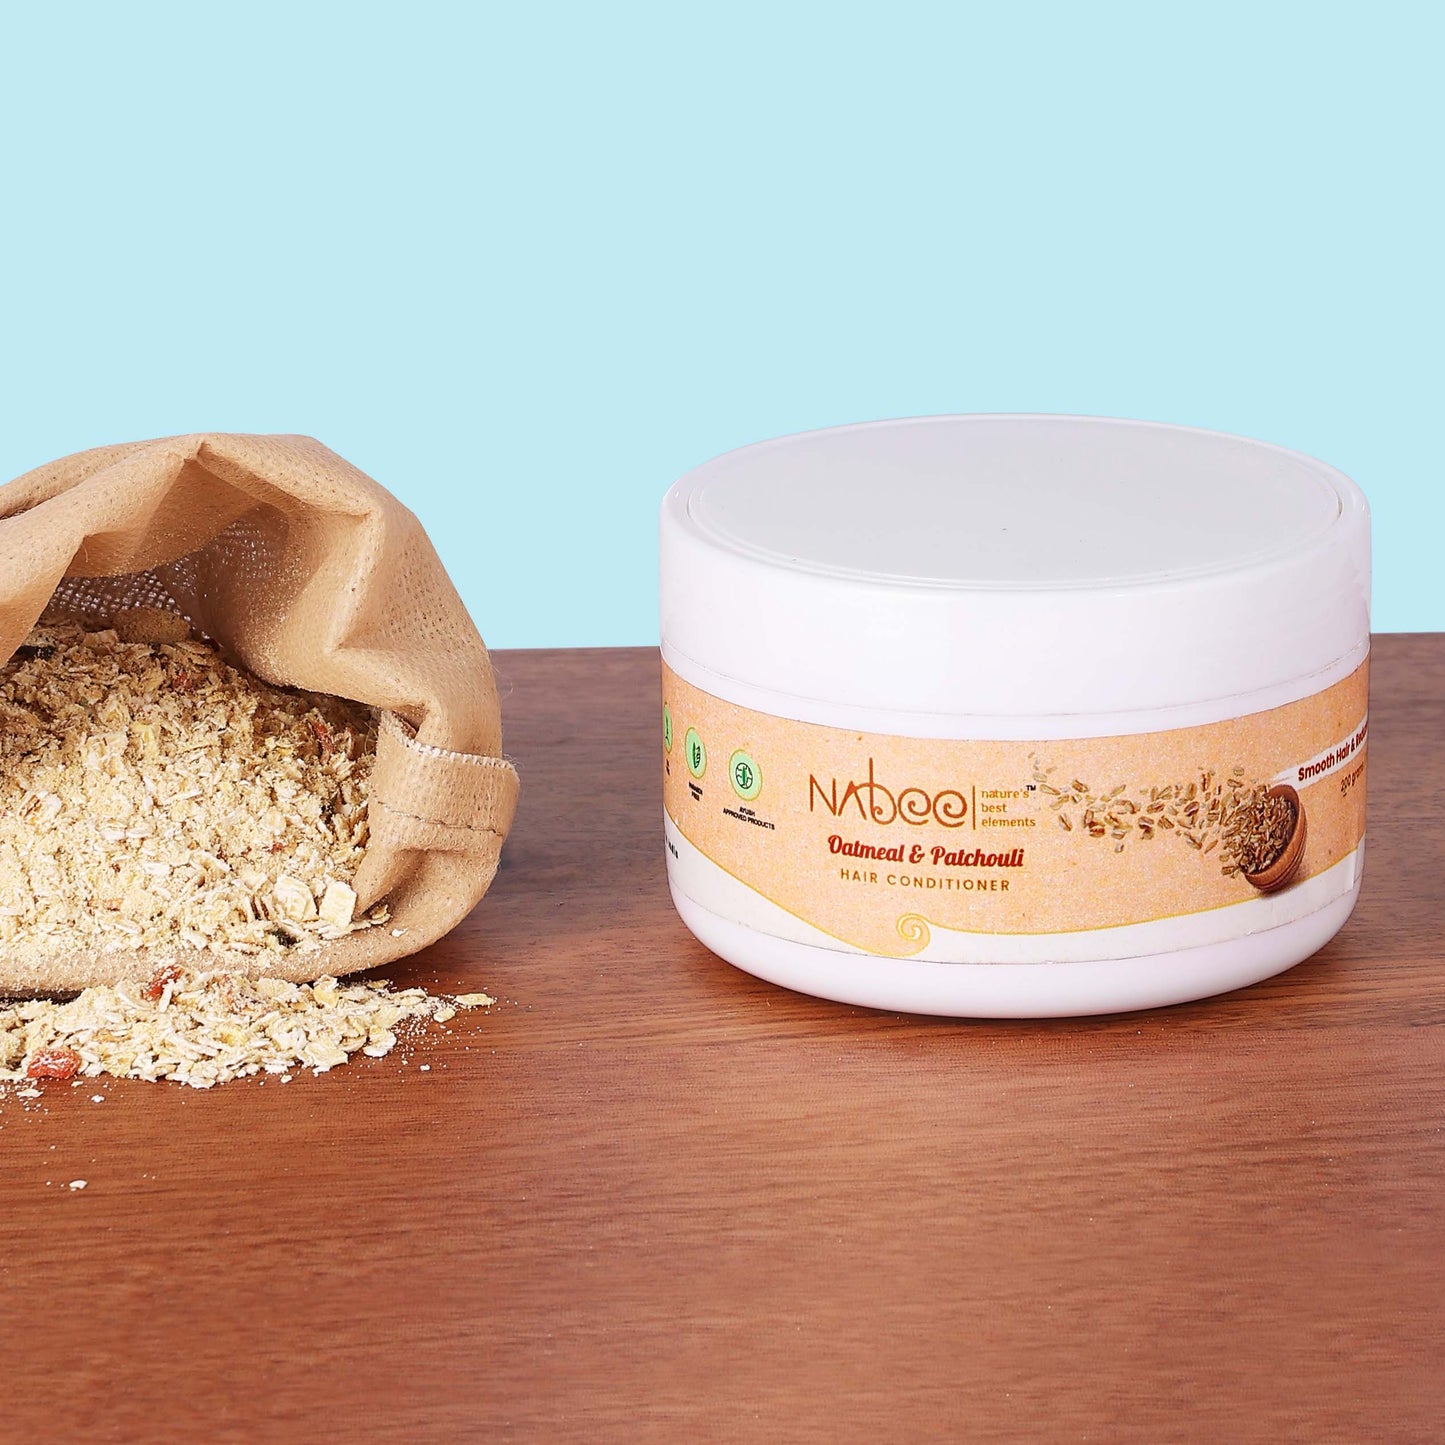 Oatmeal & Patchouli Hair Conditioner (200 gms)